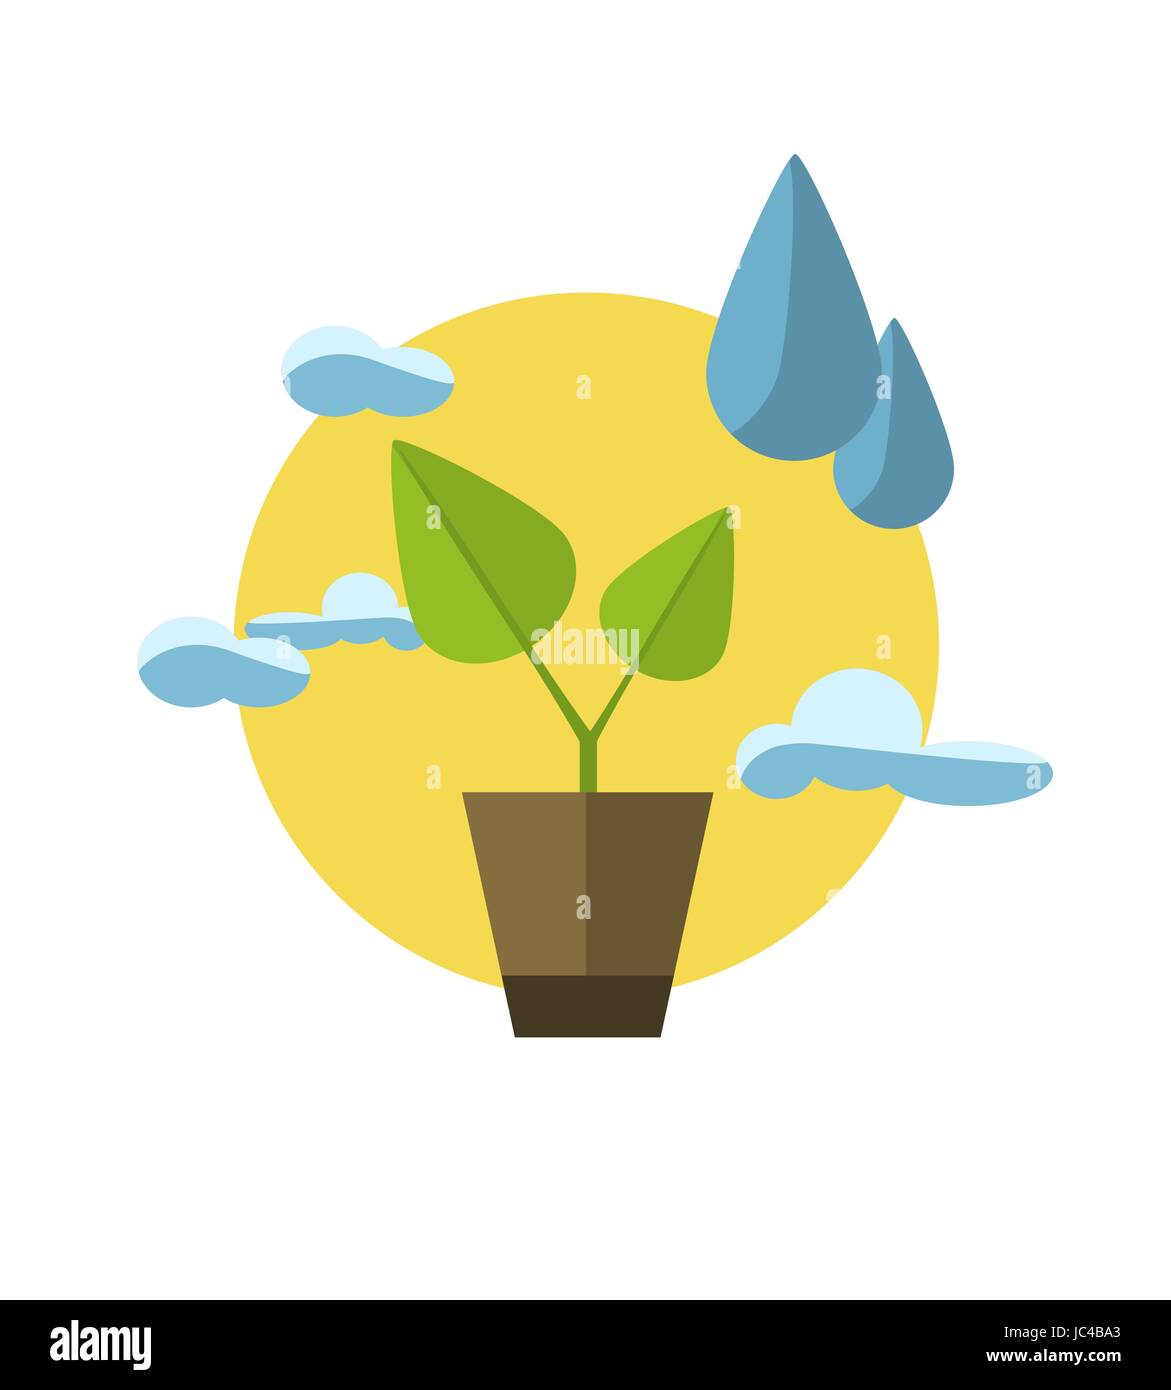 concept illustration with icon of ecology  Stock Vector